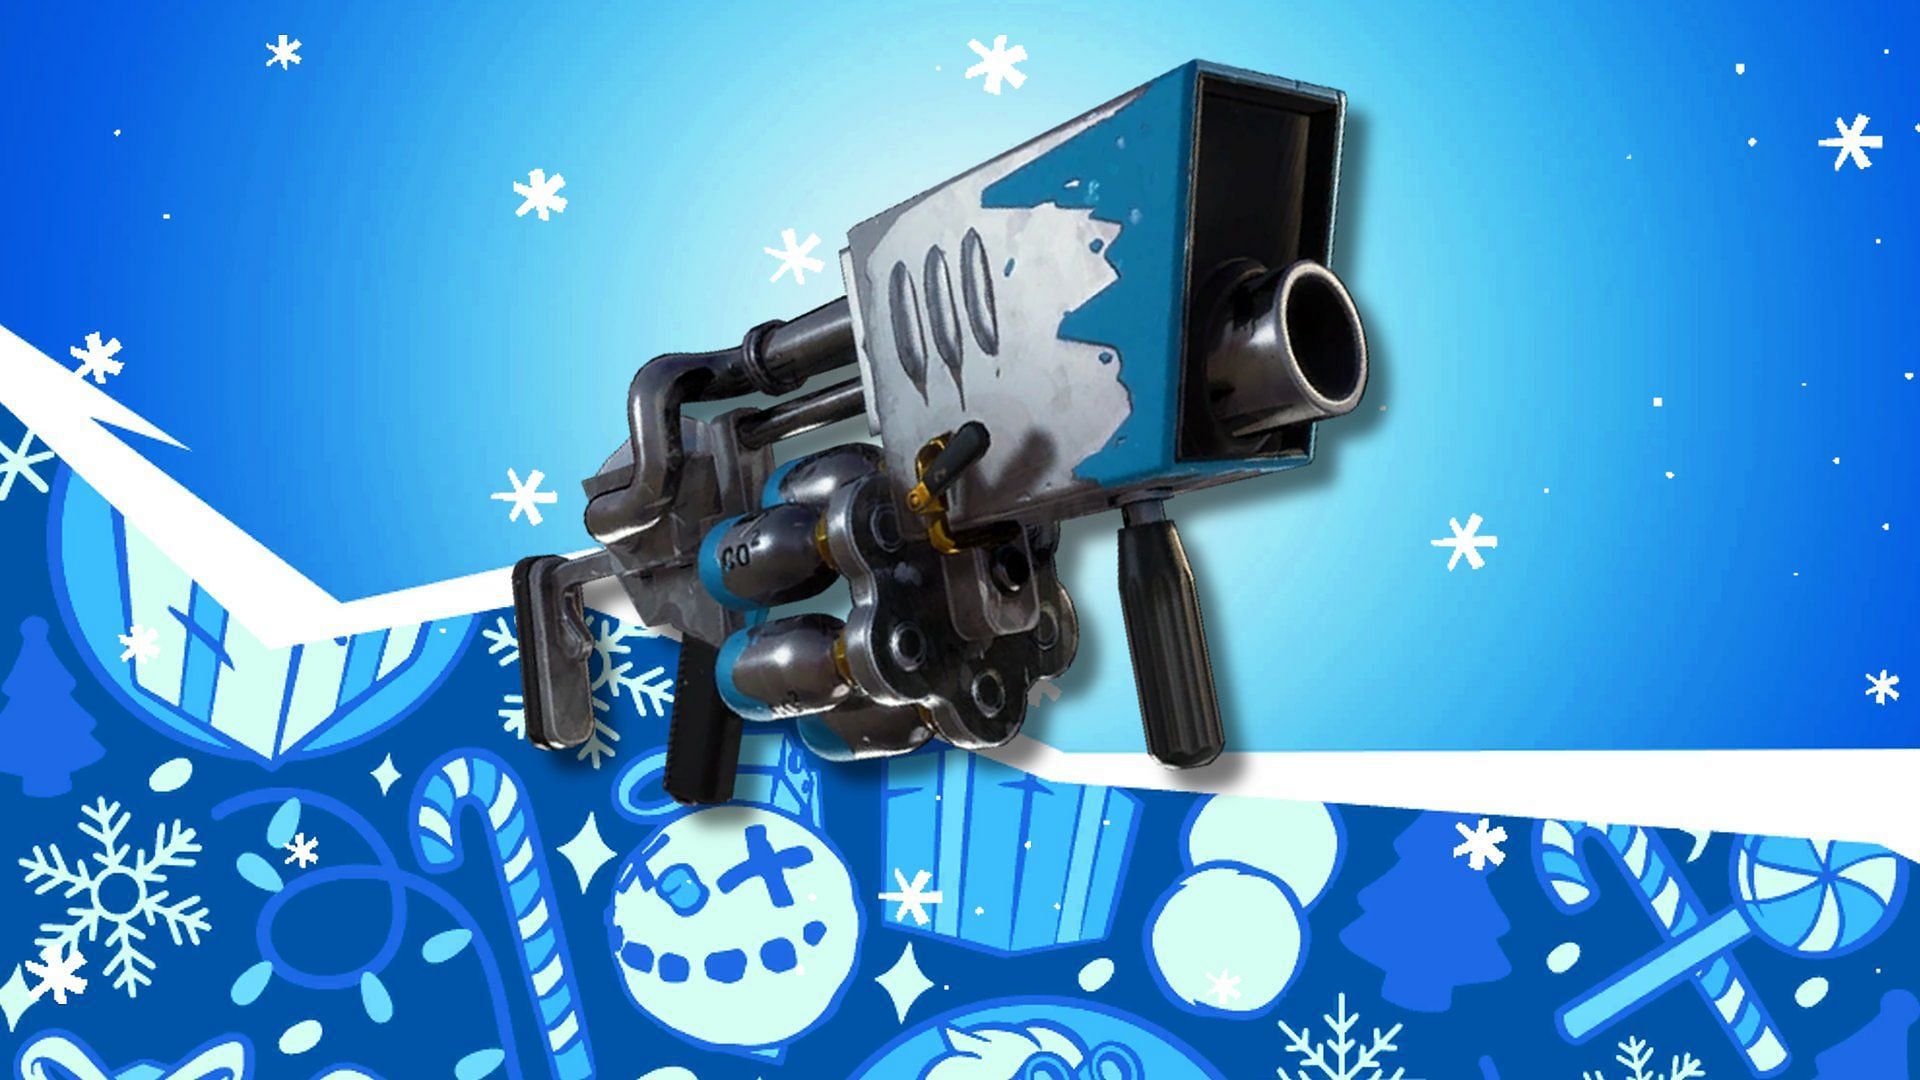 Find Snowball Launchers in Fortnite chests and presents across the map (Image via Epic Games)